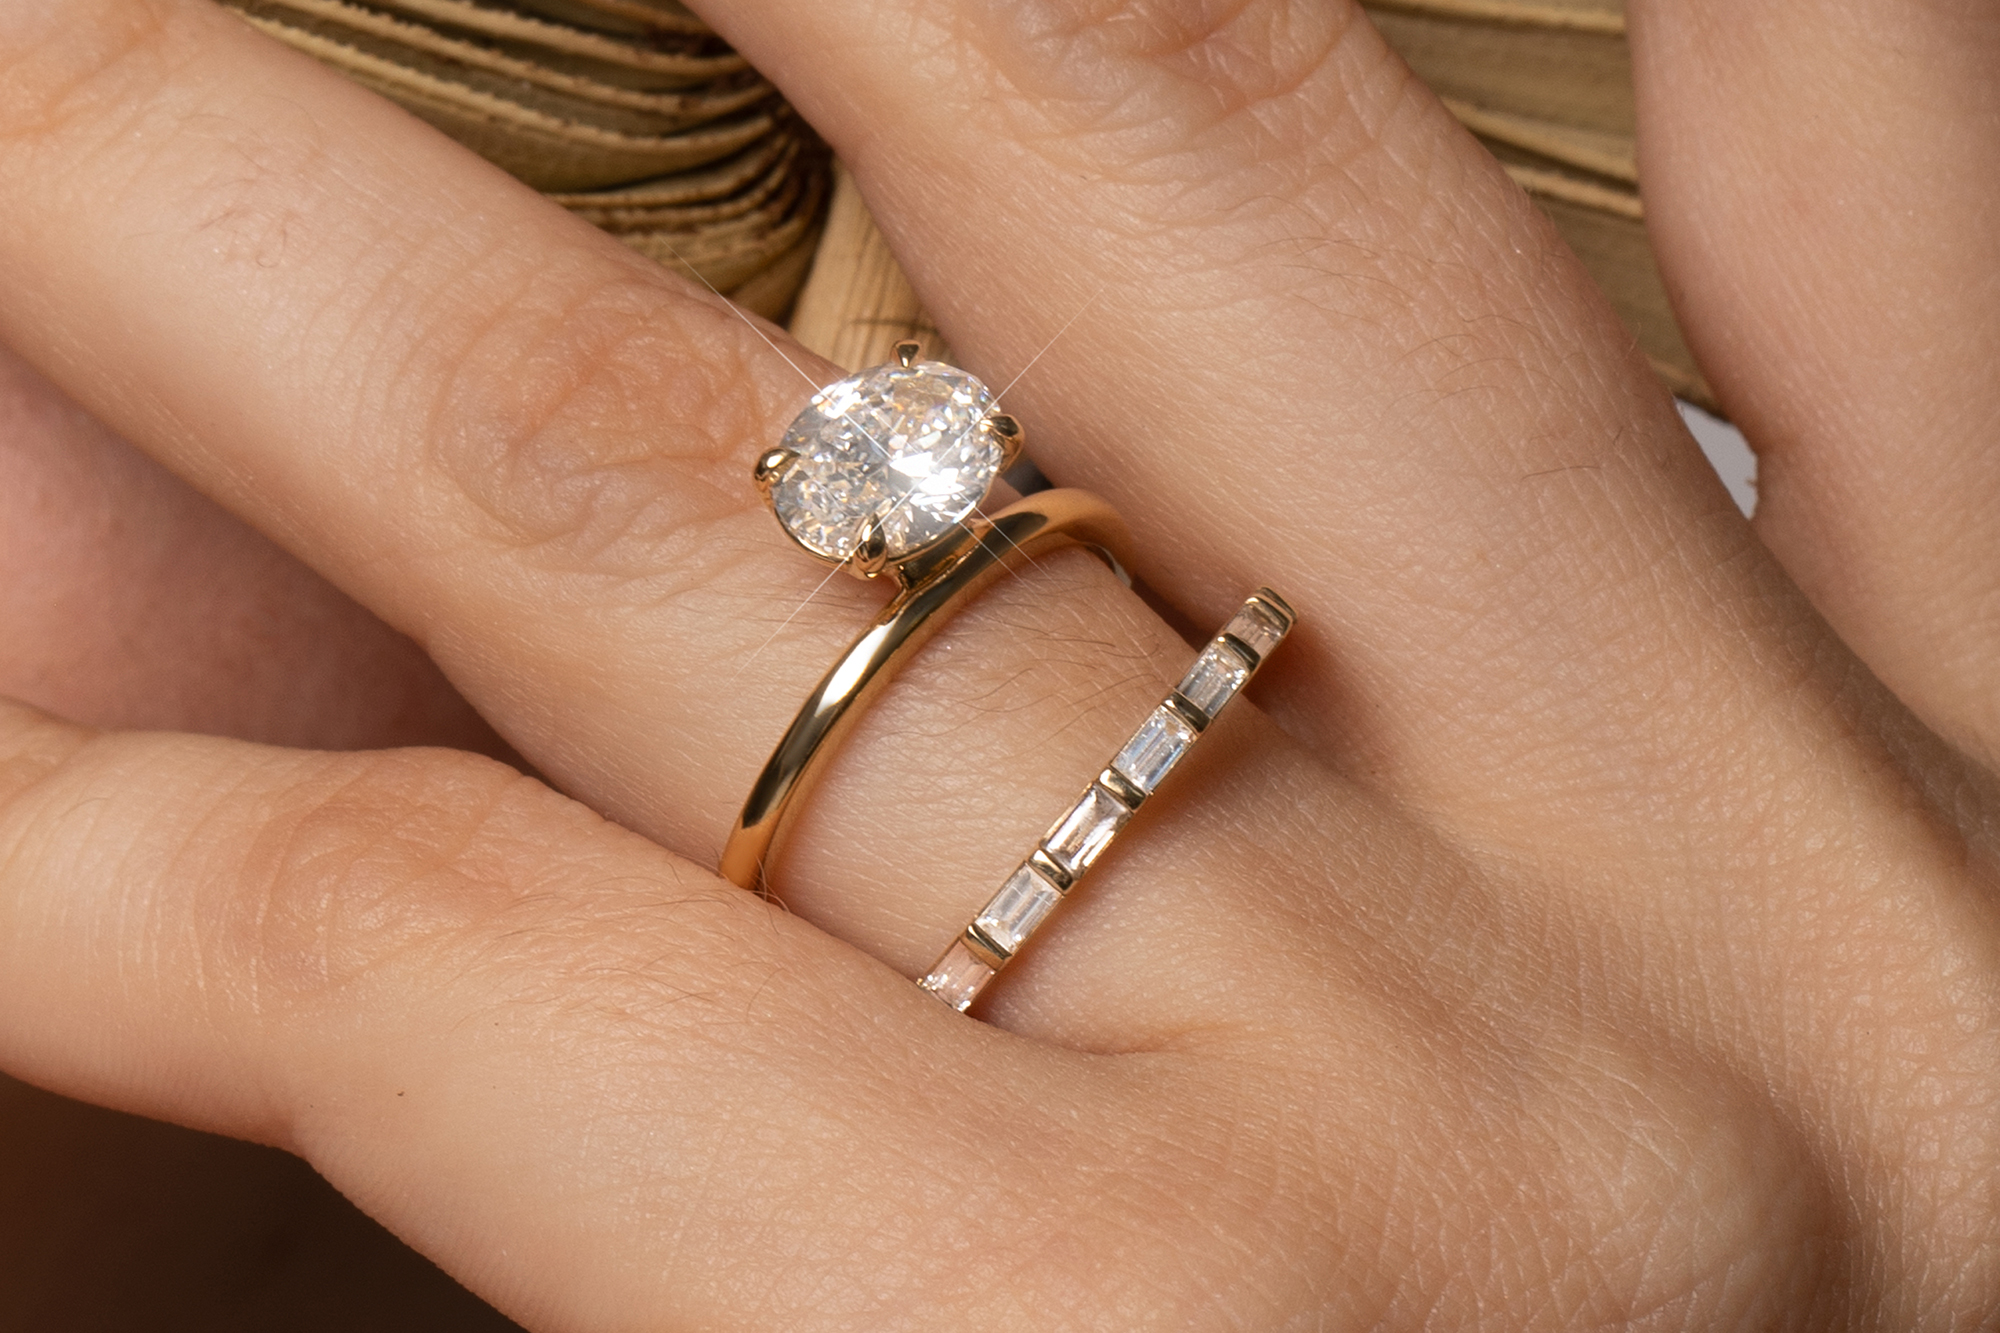 How to Keep Wedding Rings and Engagement Rings Together